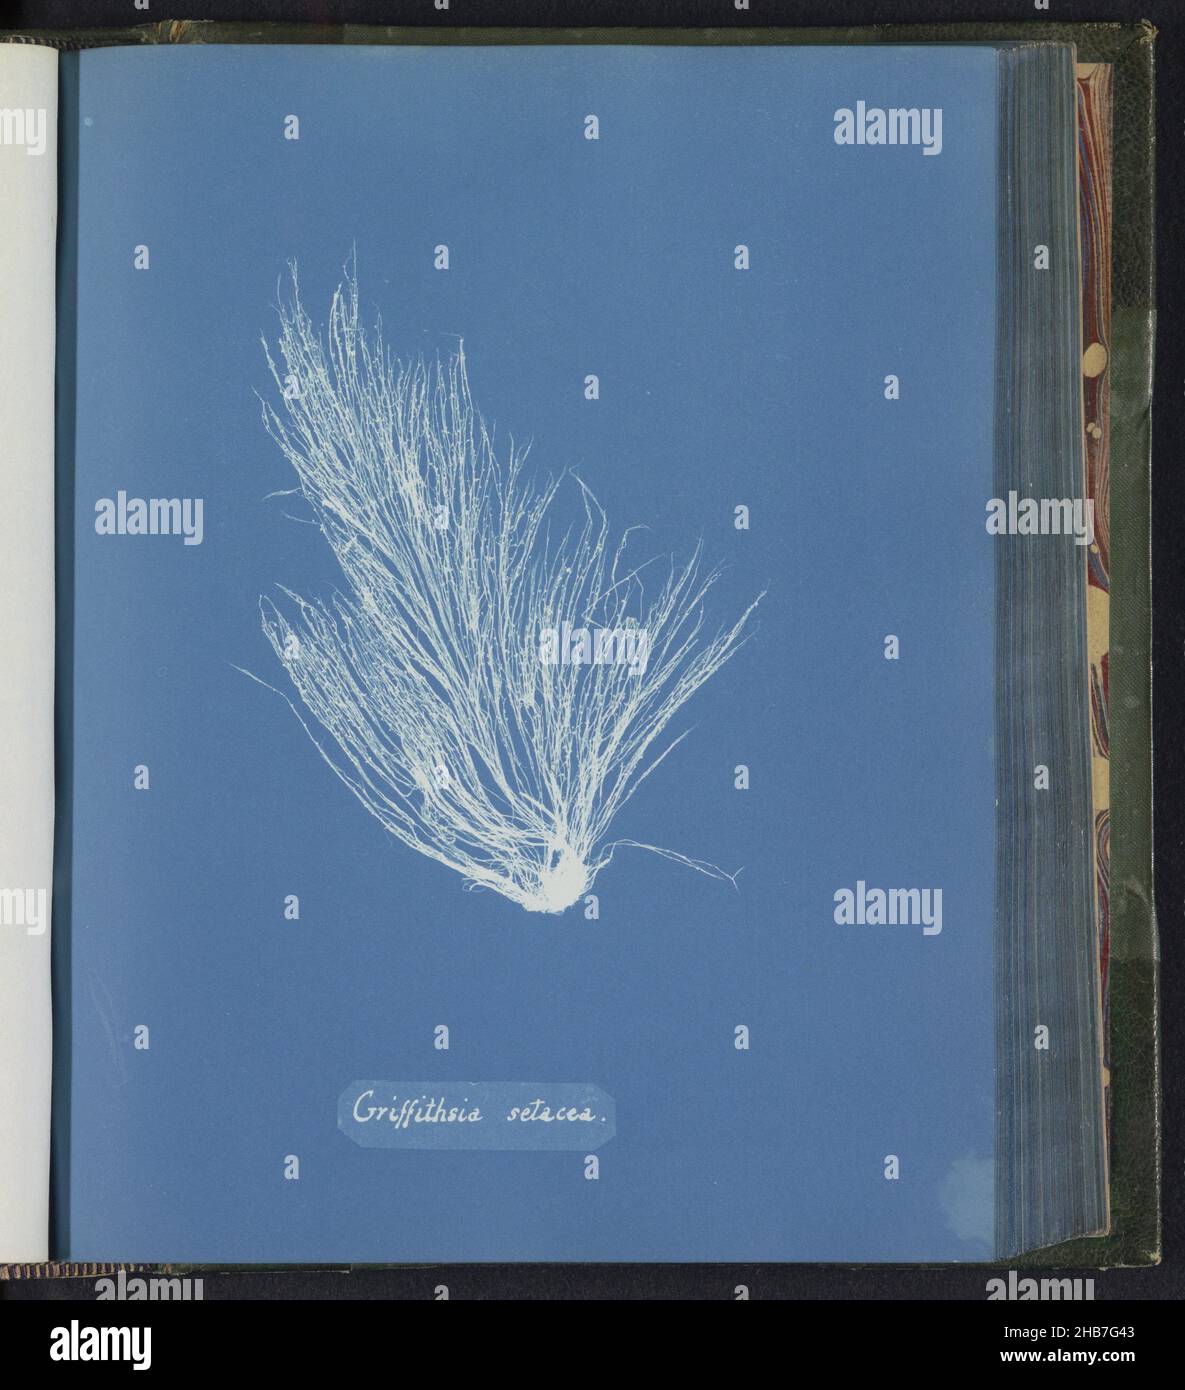 Griffithsia setacea, Anna Atkins, United Kingdom, c. 1843 - c. 1853, photographic support, cyanotype, height 250 mm × width 200 mm Stock Photo